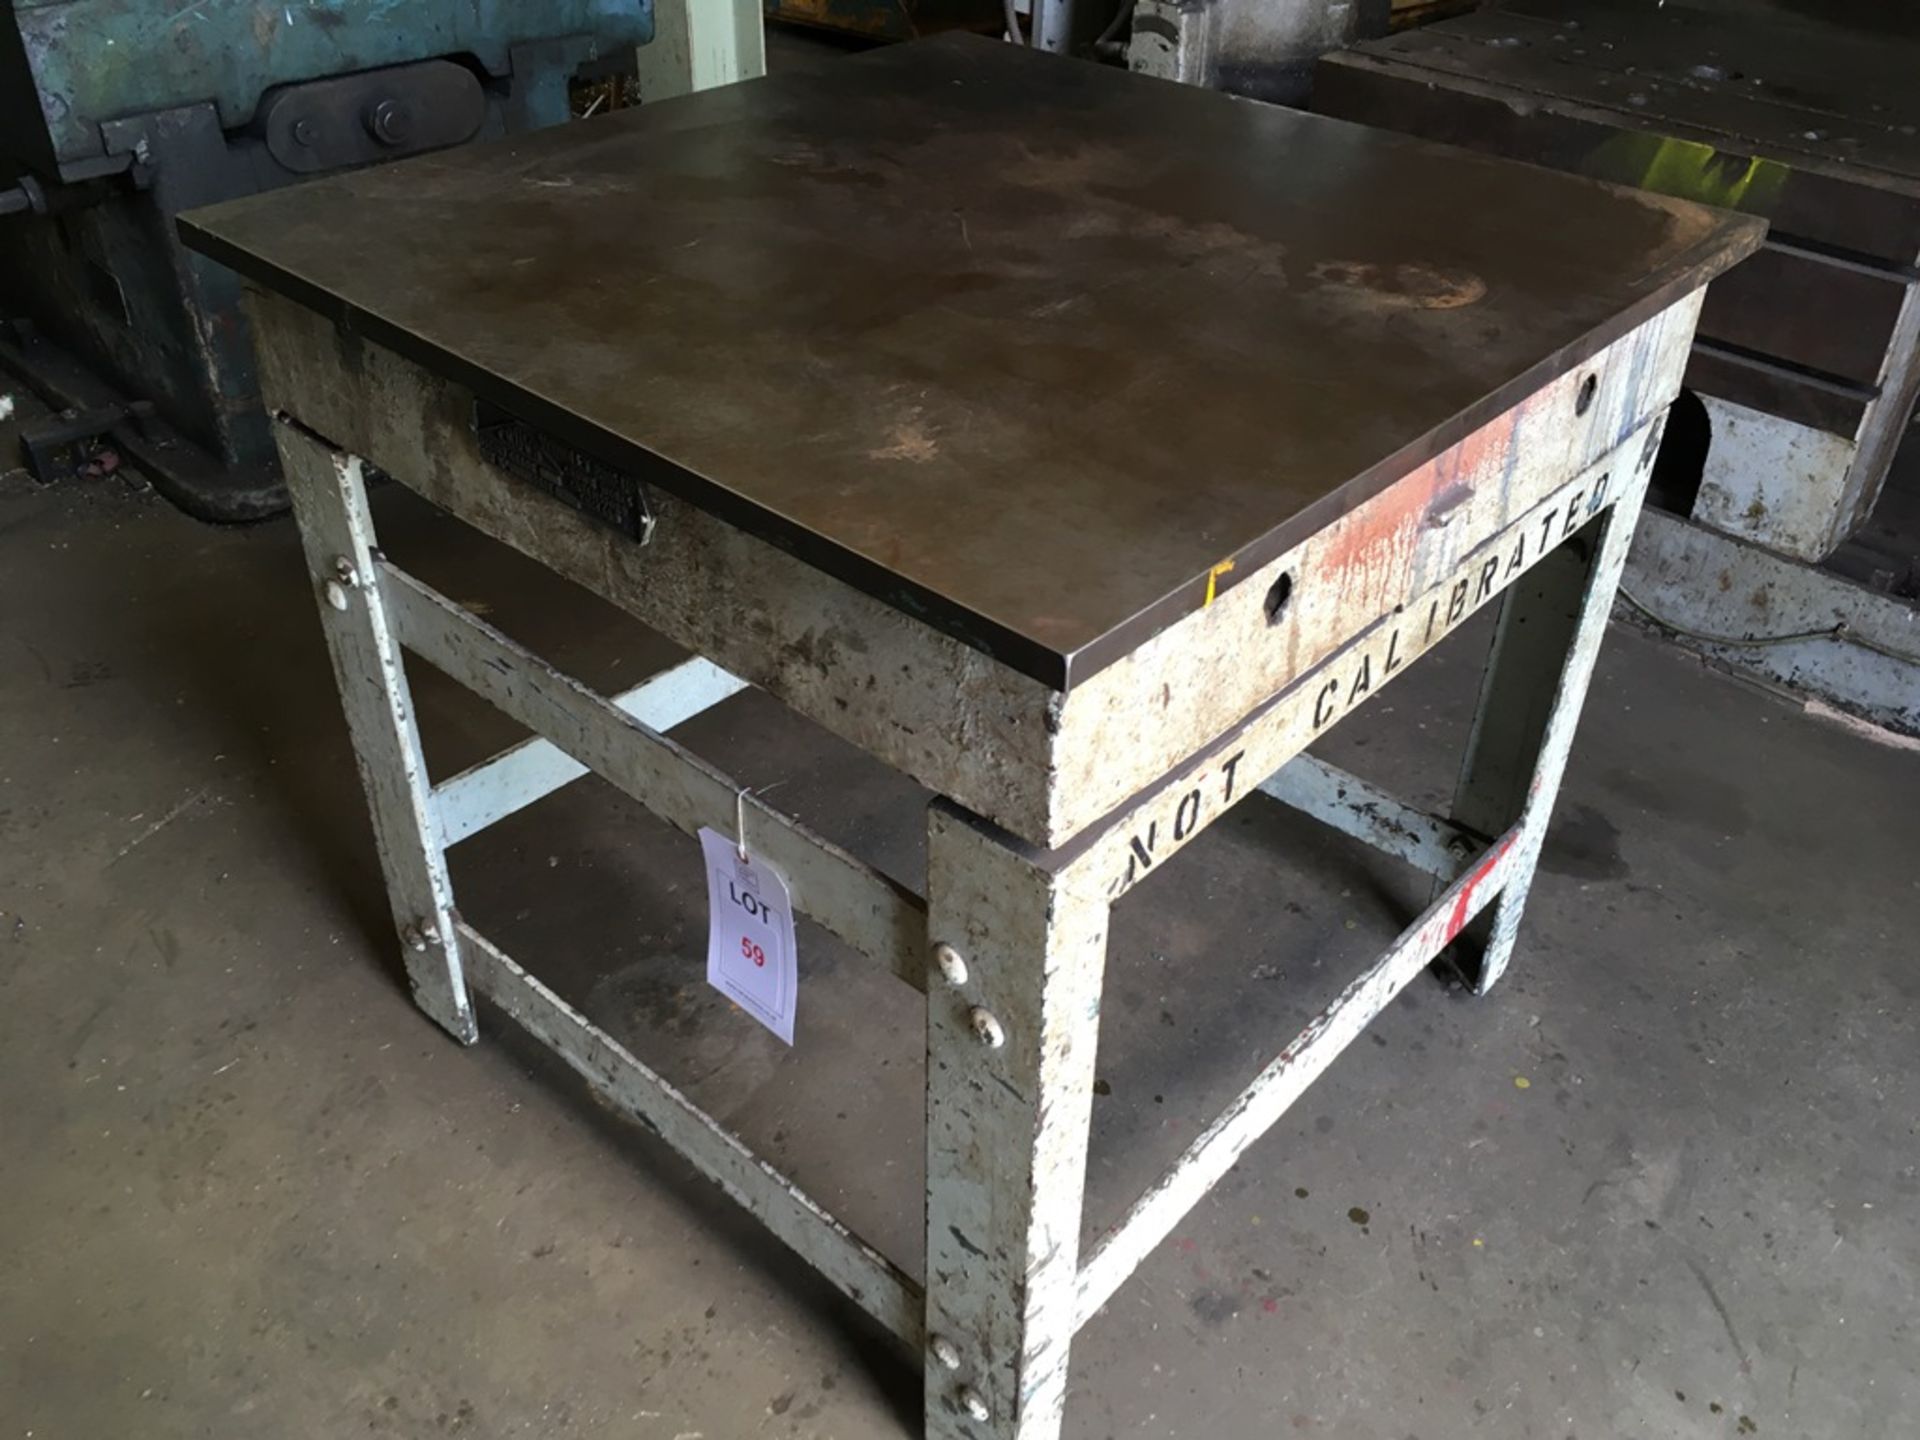 Steel inspection table (Please note: A work Method Statement and Risk Assessment must be reviewed - Image 2 of 3